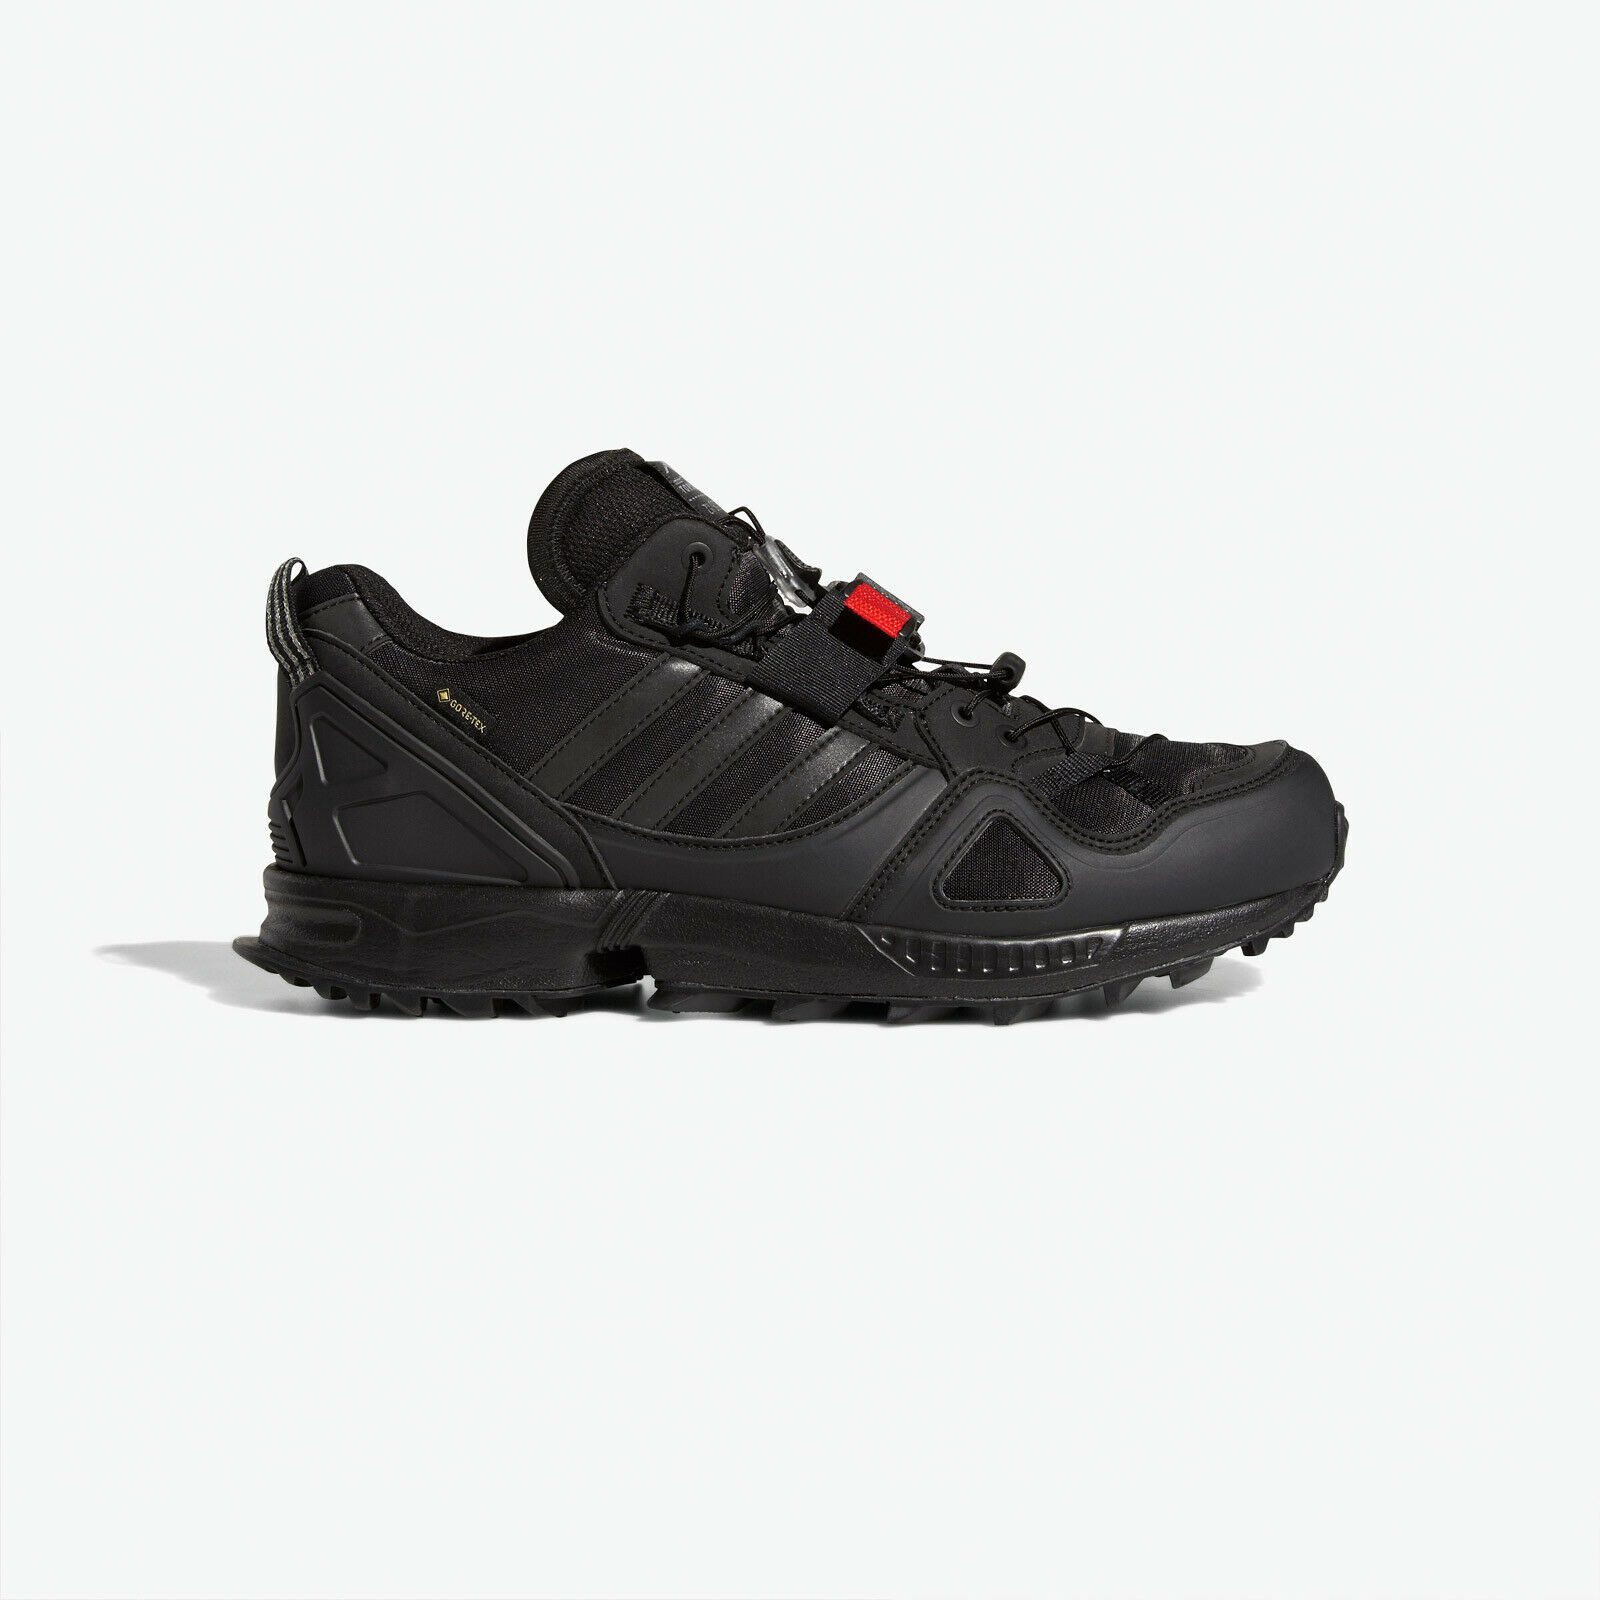 adidas Originals ZX 9000 Gore Tex GTX Shoes in Black and Red